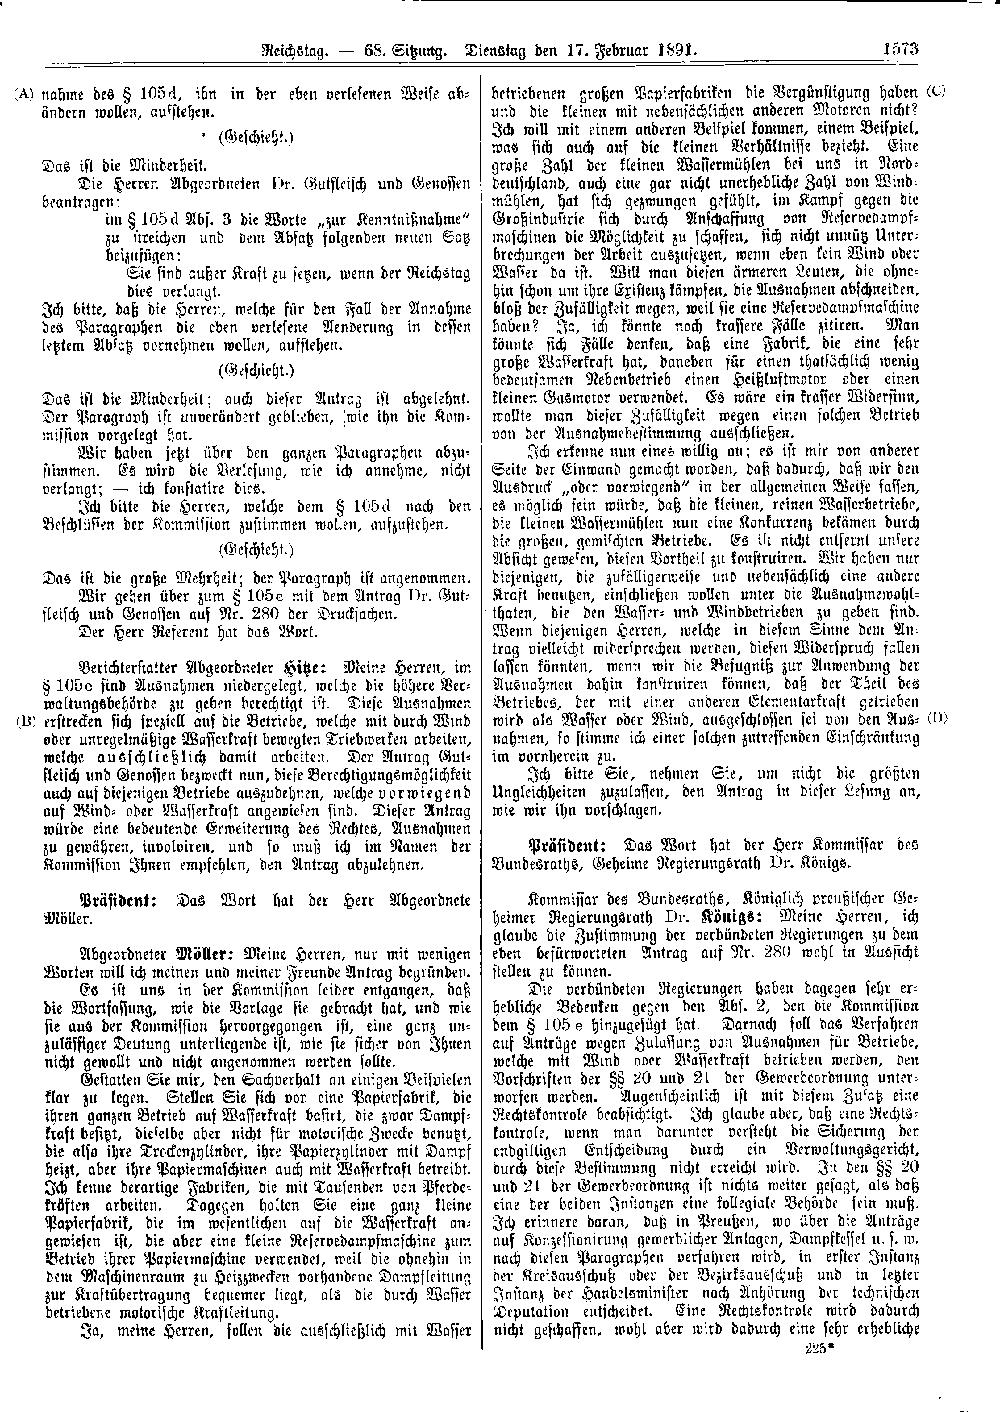 Scan of page 1573